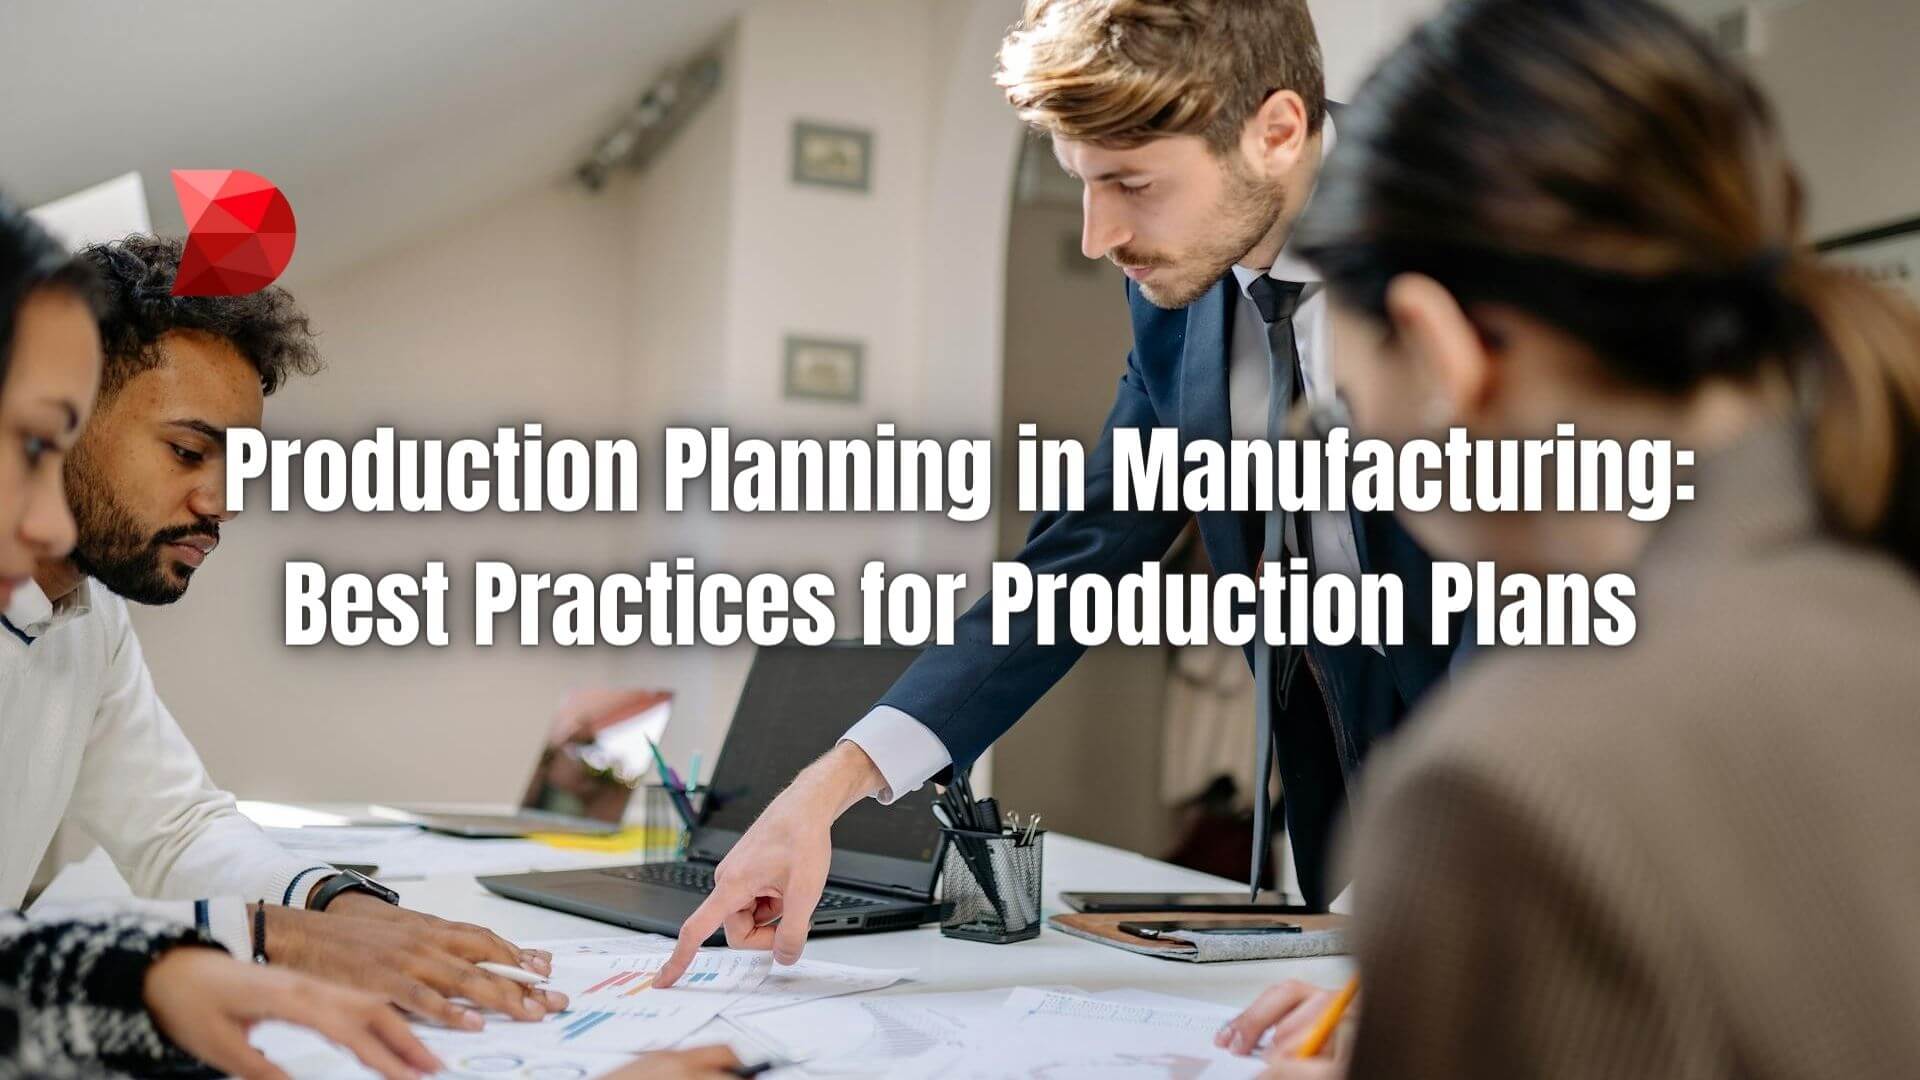 Streamline your manufacturing operations with our guide to production planning. Learn best practices and essential strategies for success.